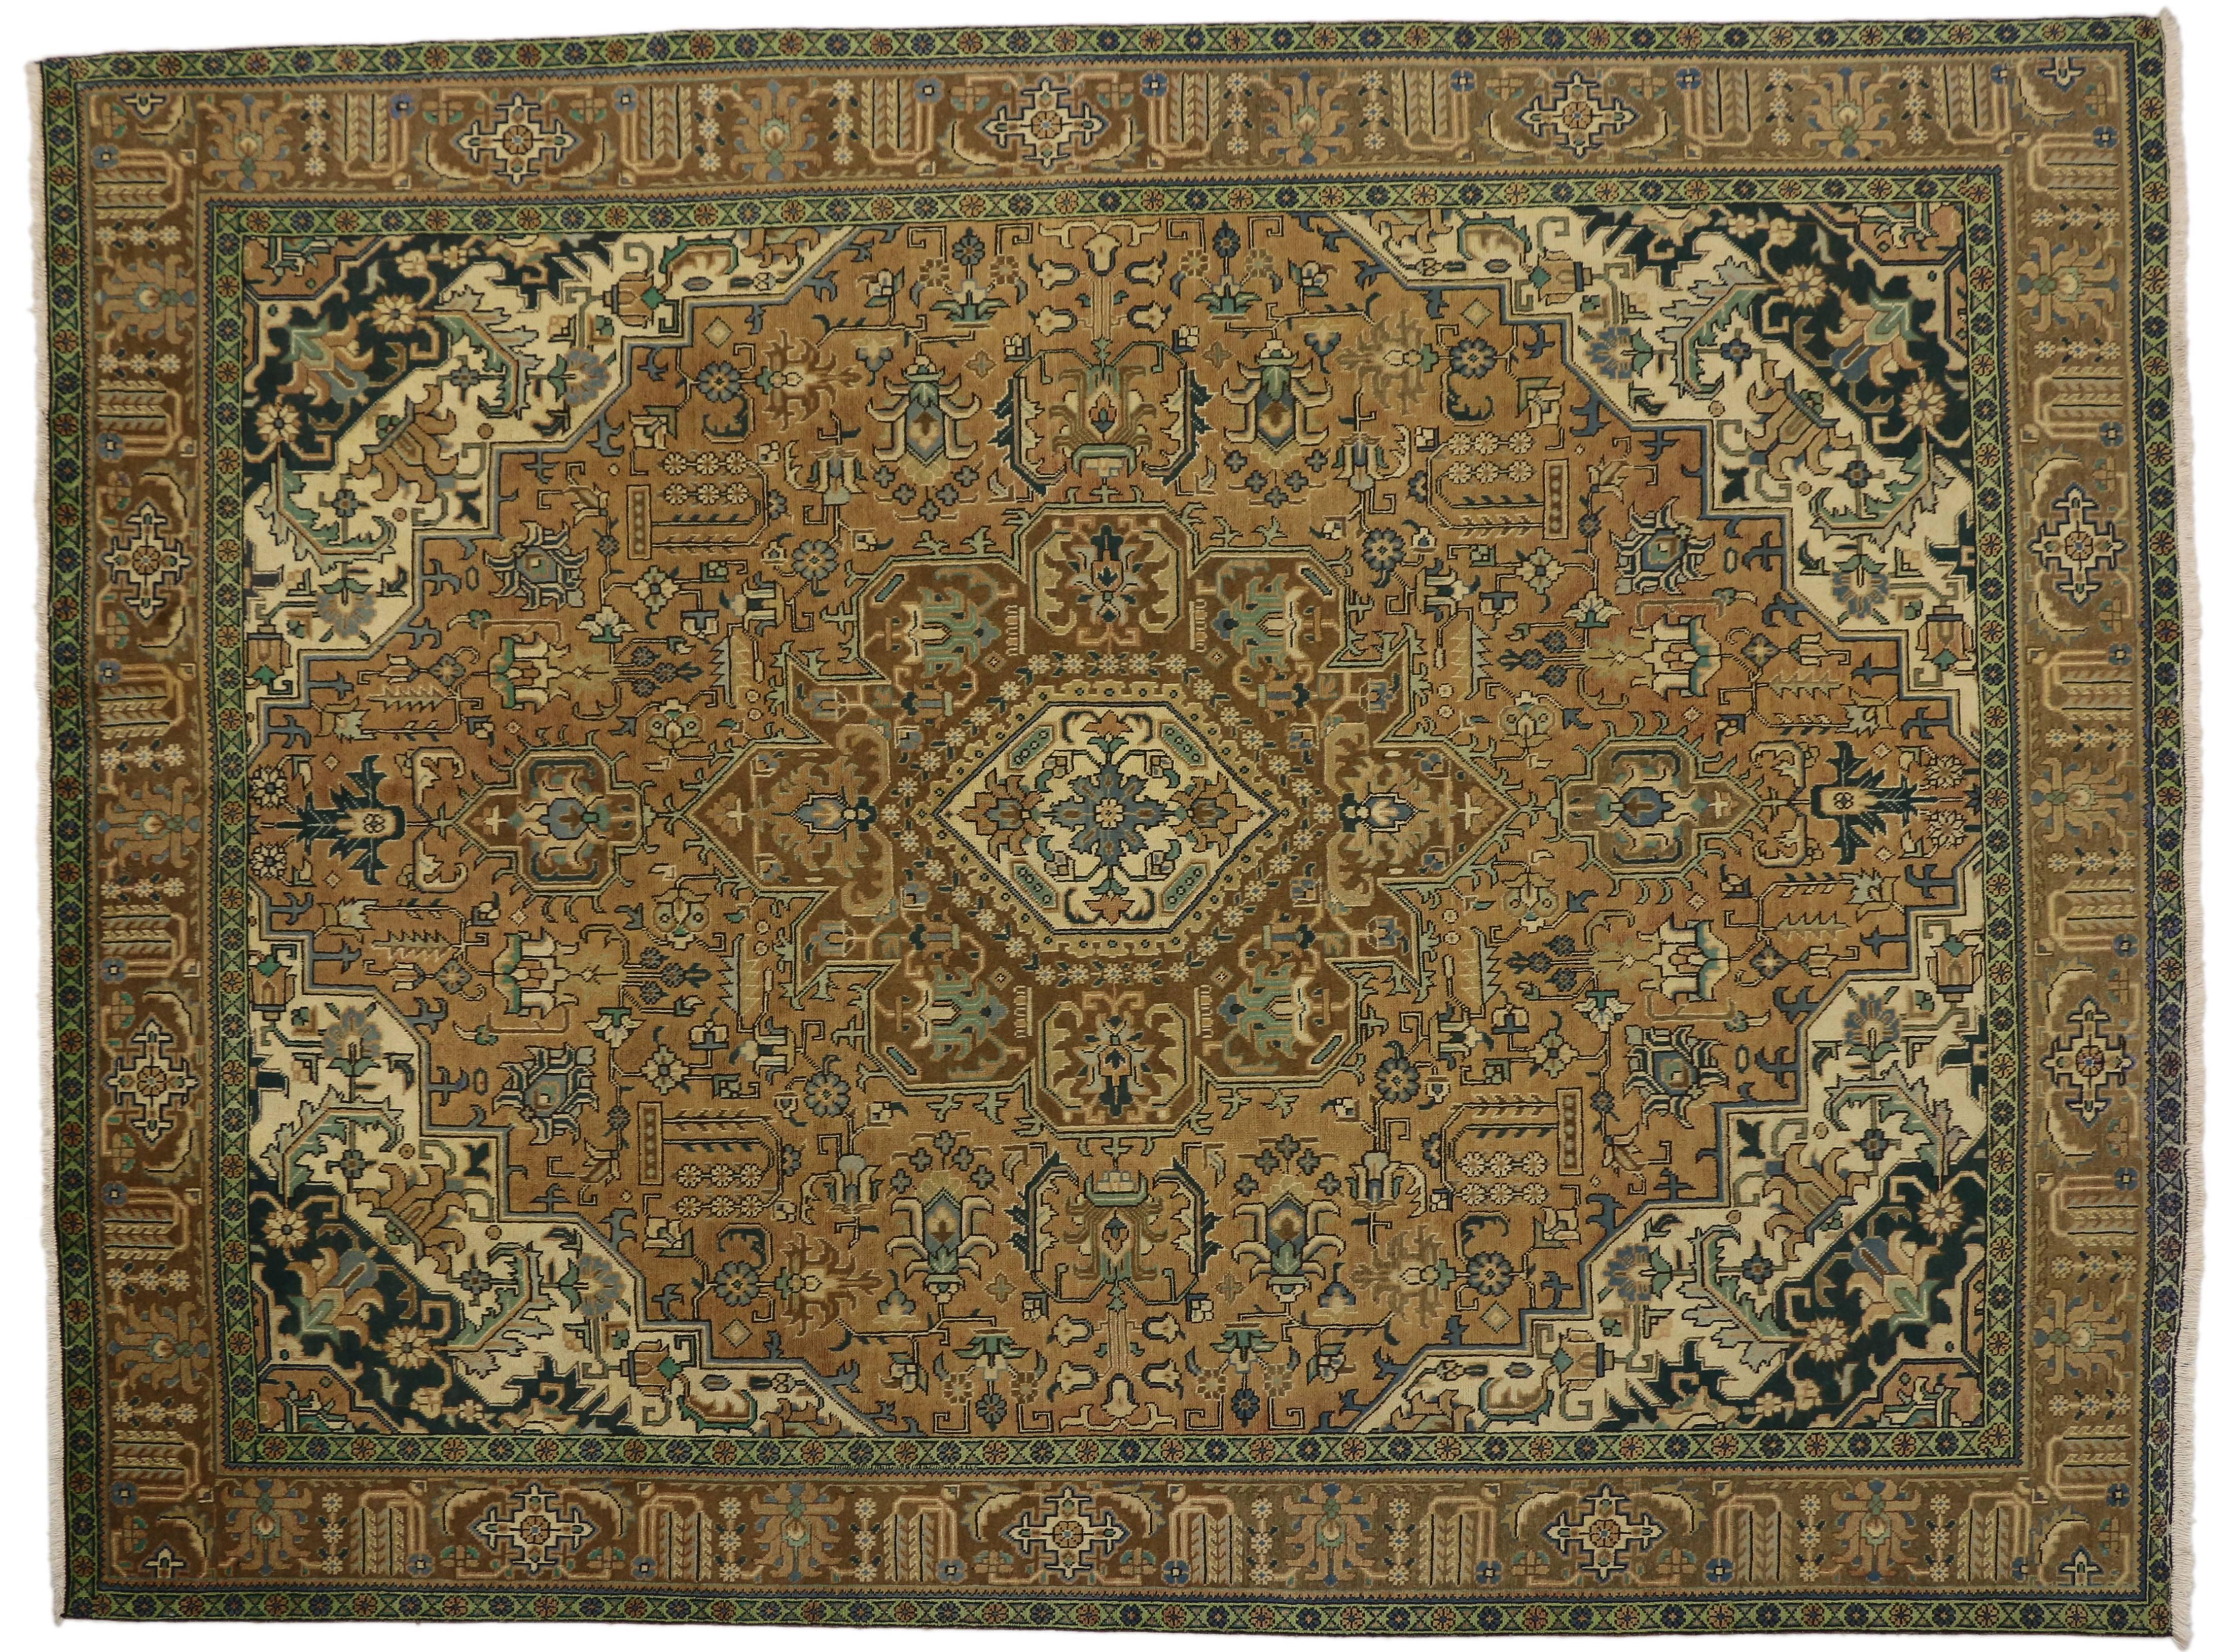 76342, vintage Persian Tabriz rug with traditional style. This hand-knotted wool vintage Persian Tabriz rug features a centre medallion with an all-over pattern surrounded by a classic border creating a well-balanced and timeless design. This